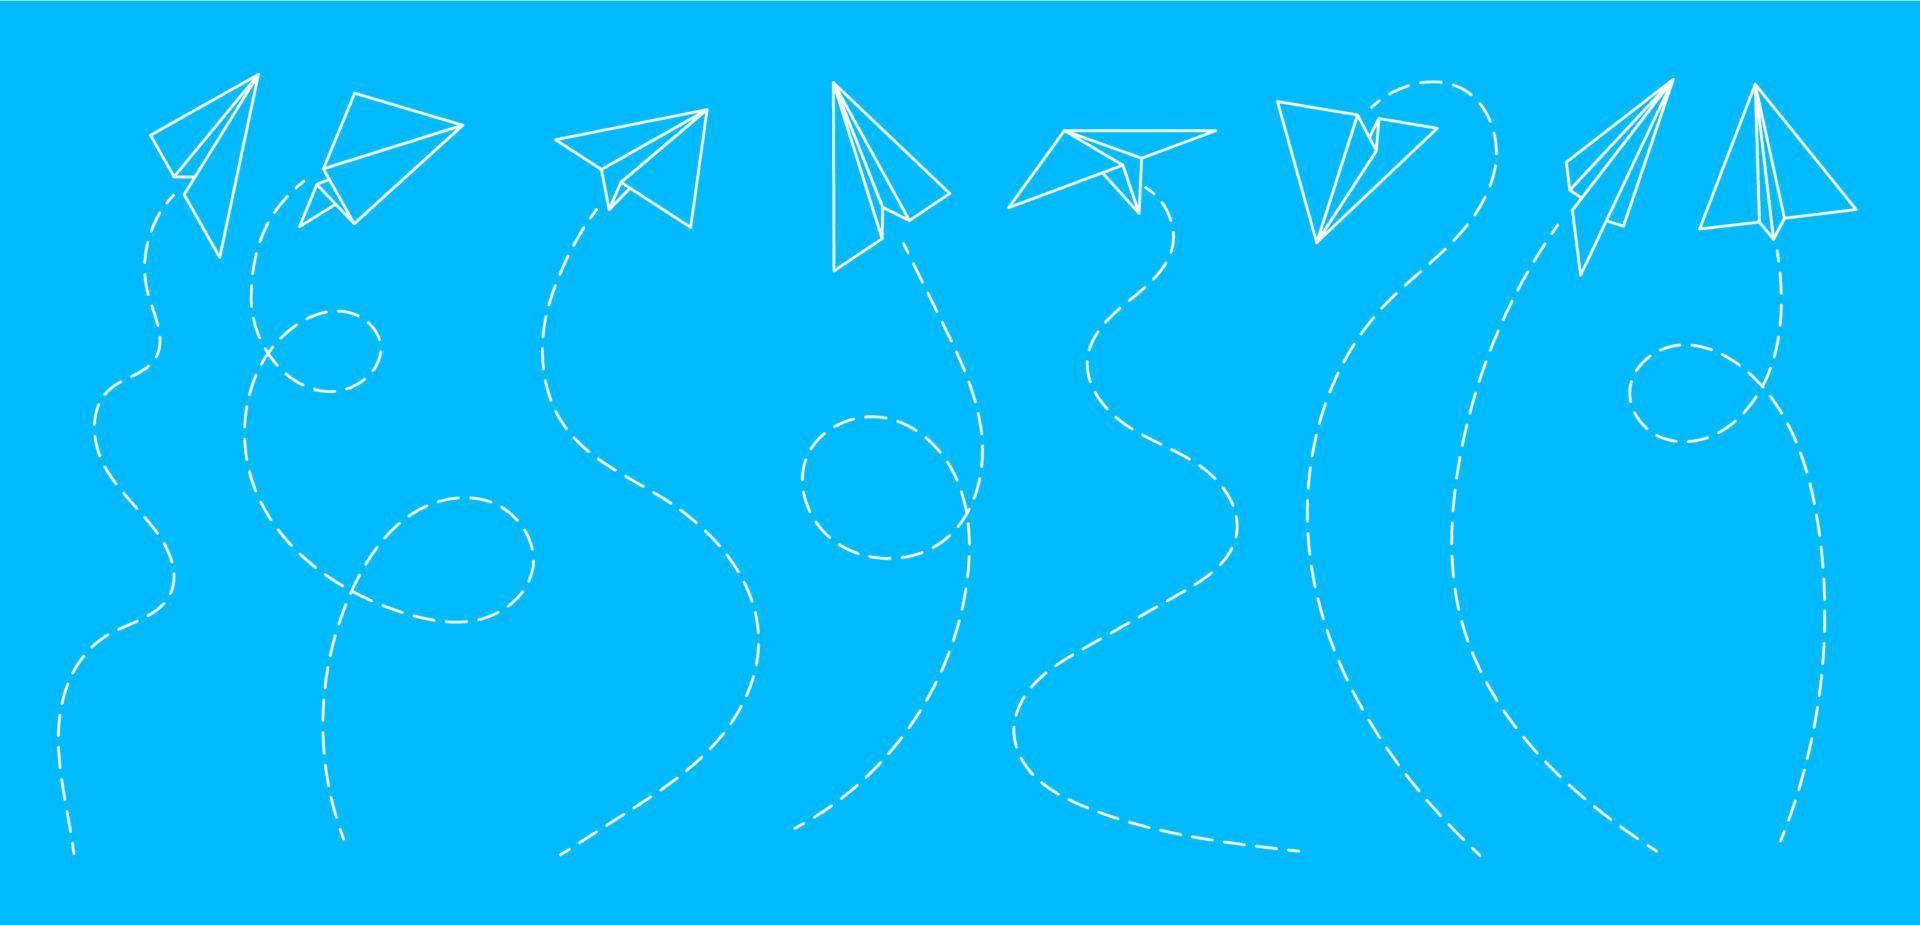 Paper aeroplane lines, toy plane flight trail vector